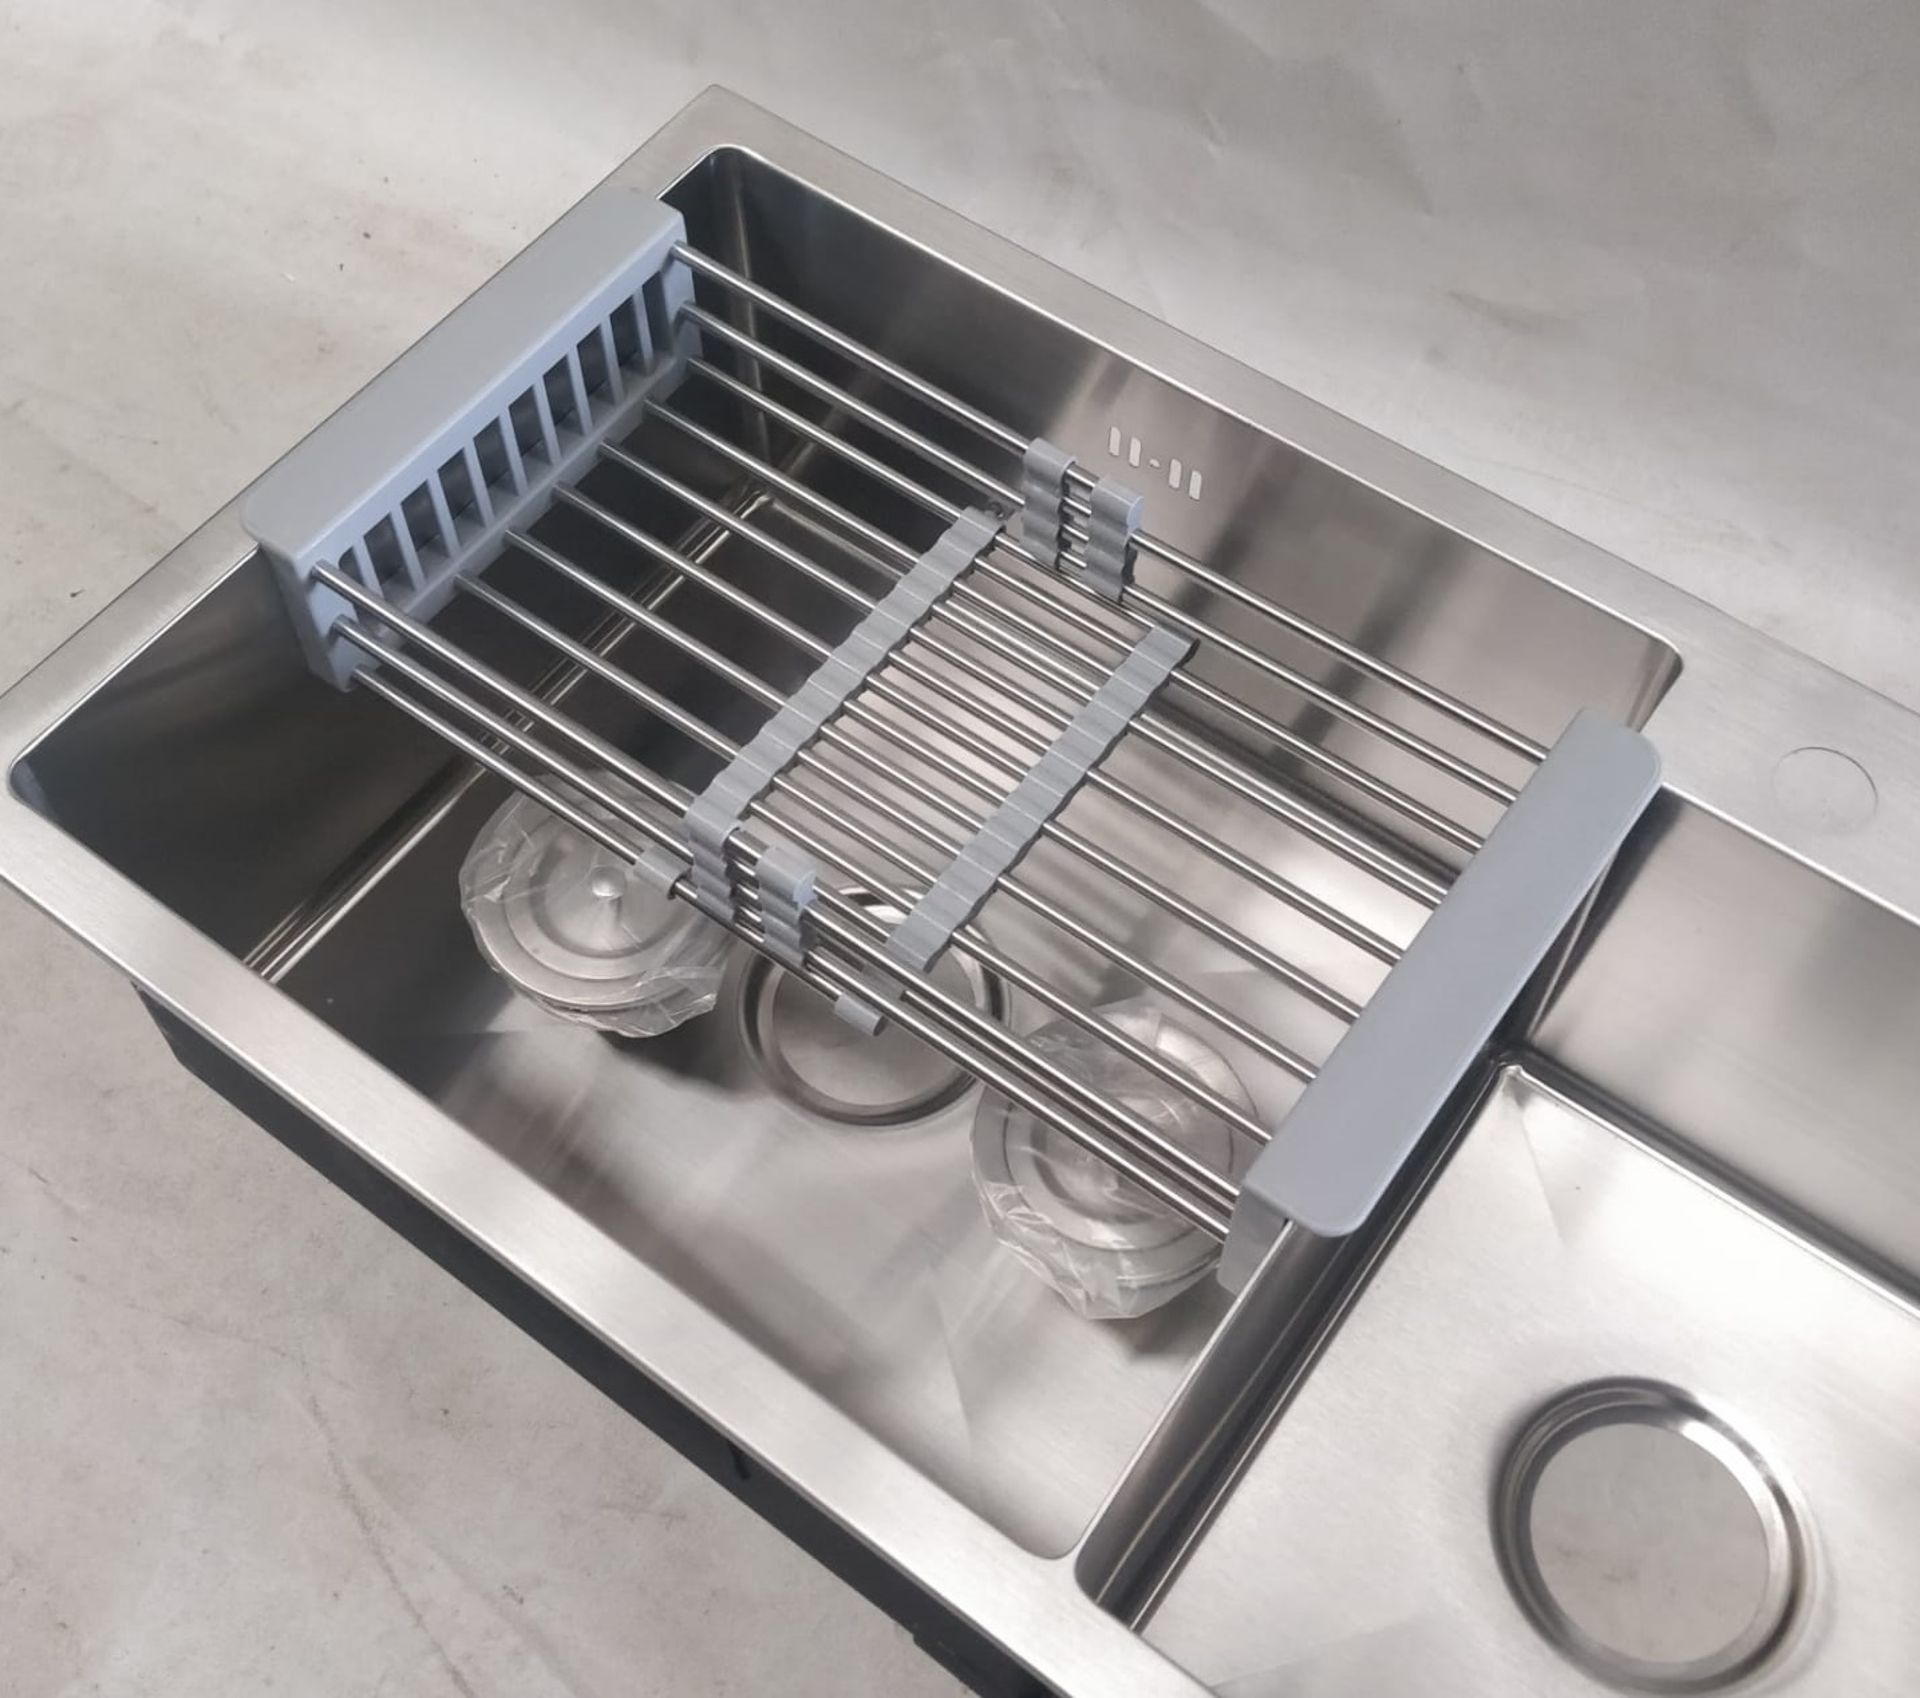 1 x Twin Bowl Contemporary Kitchen Sink Basin - Stainless Steel Finish - Model KS0059 - Includes - Image 5 of 16